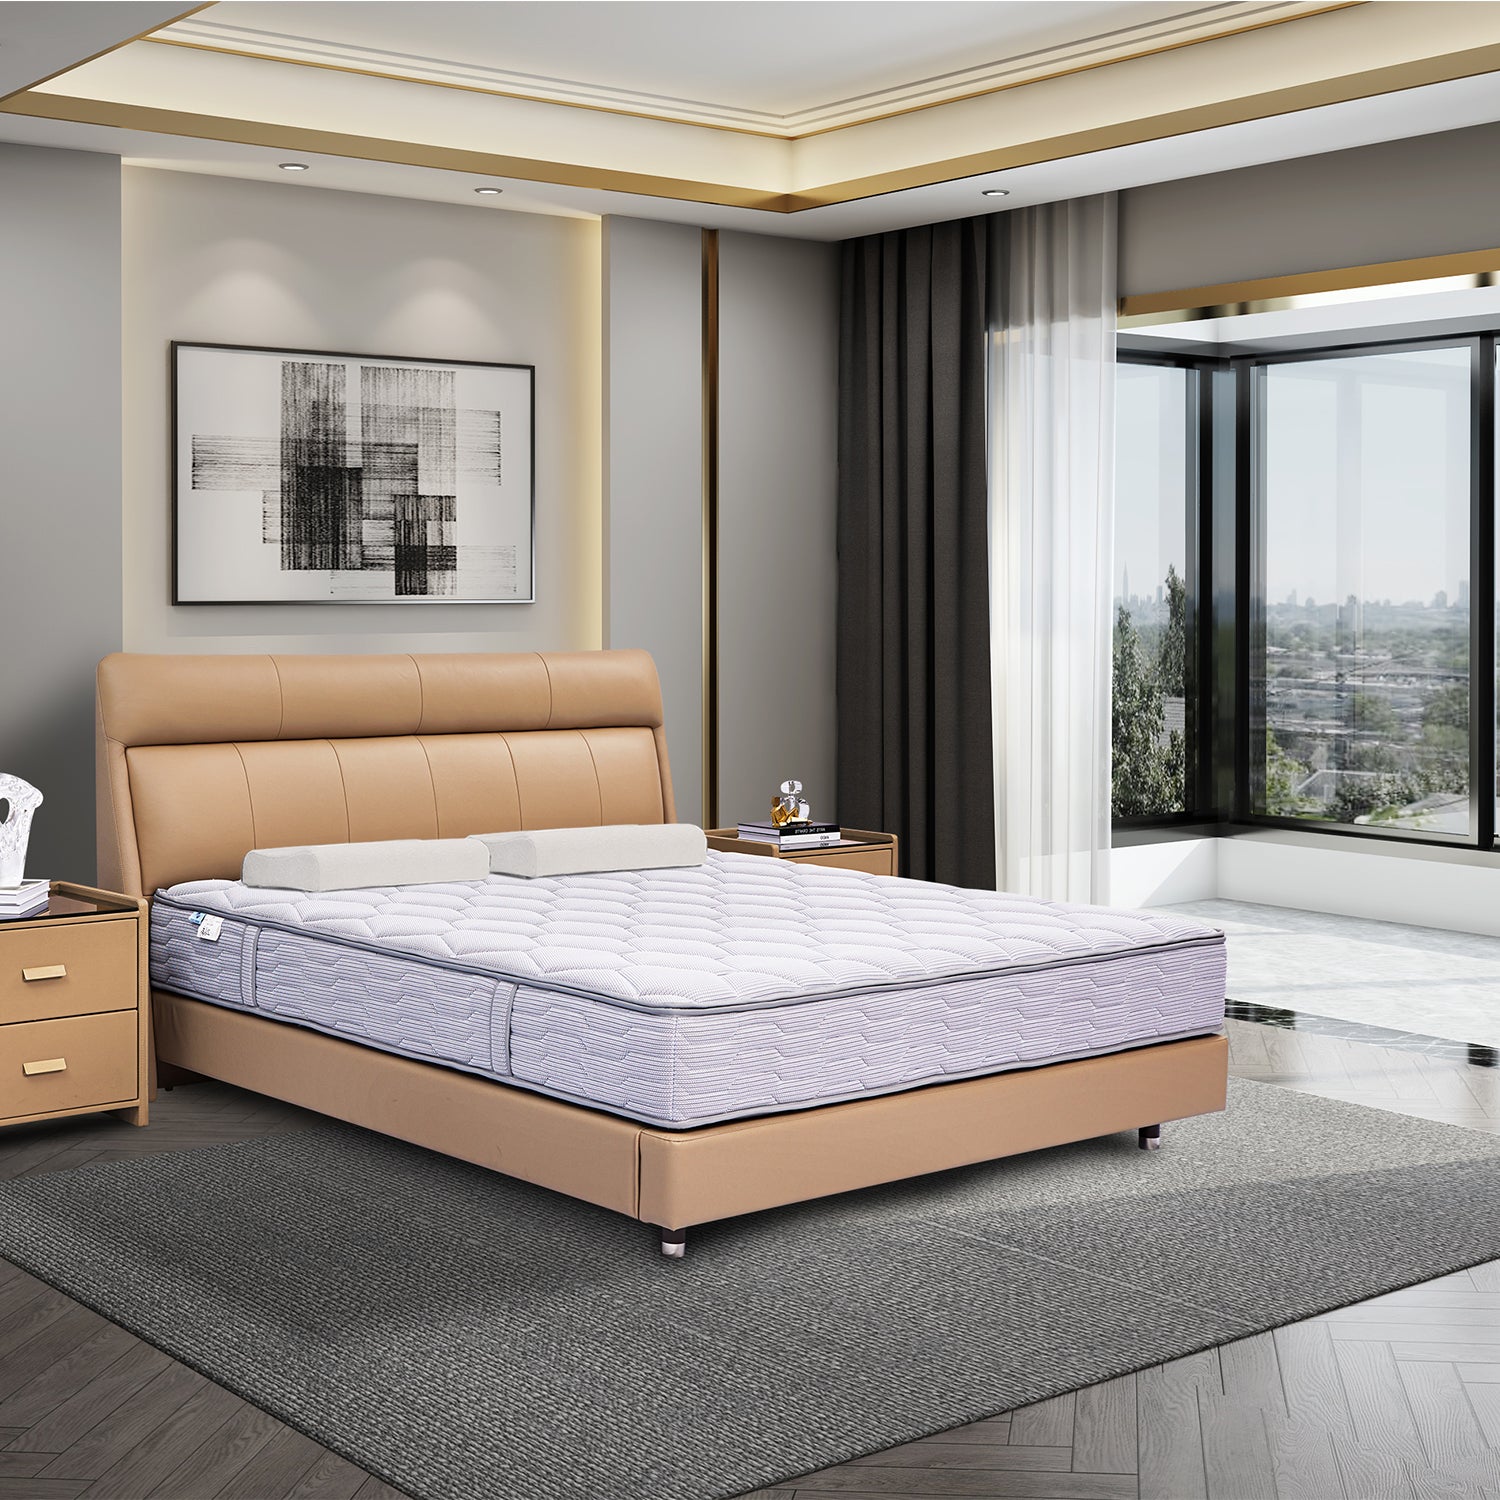 Modern bedroom with beige leather bed frame and comfortable mattress, flanked by wooden nightstands, large window with curtains, dark grey rug, and abstract artwork on the wall.